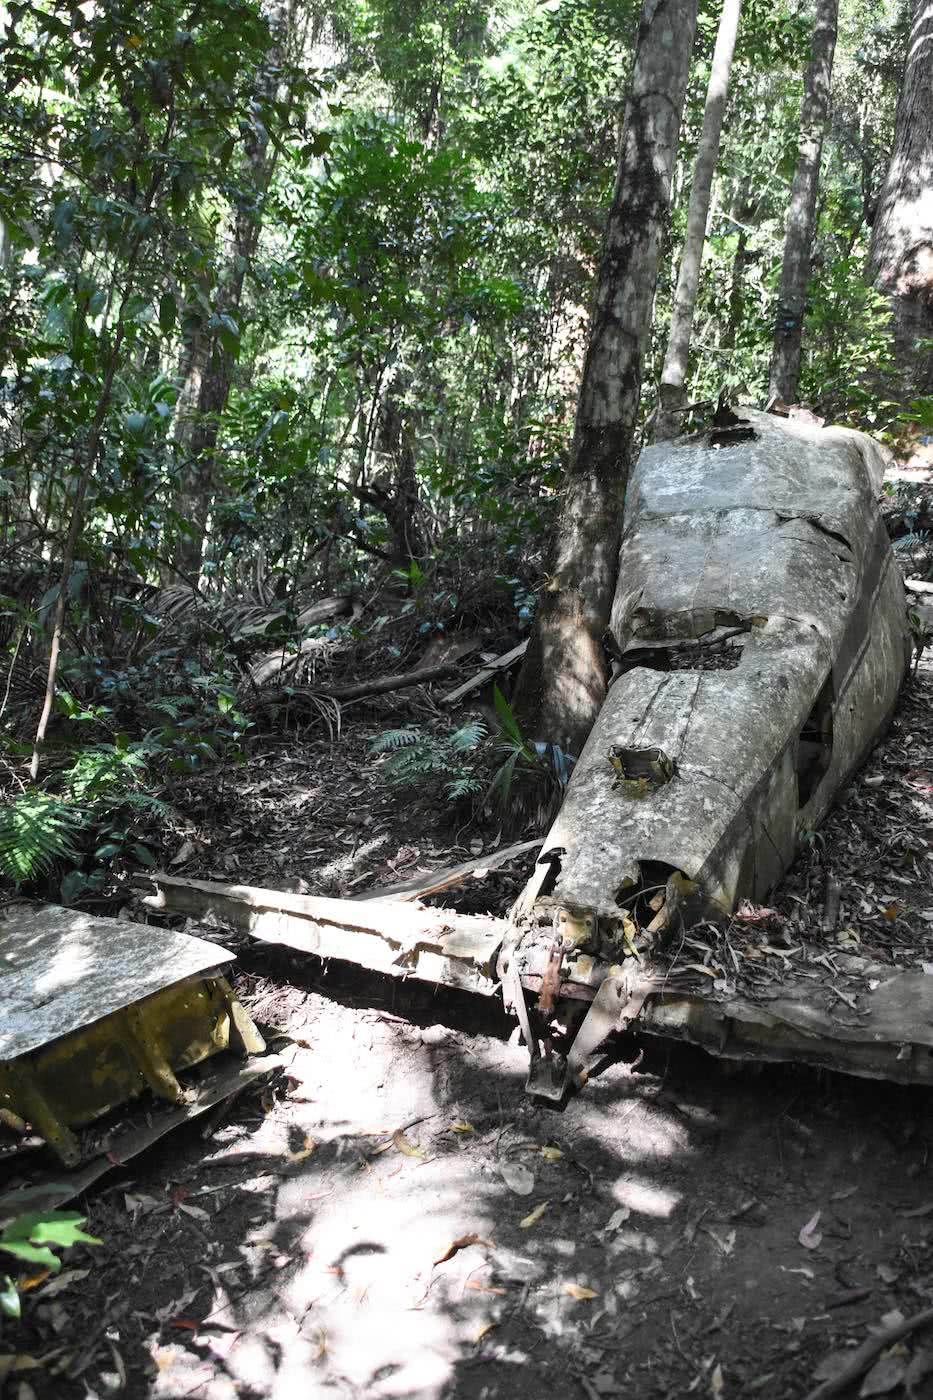 Discover The Piper Comanche Plane Wreck // D’Aguilar National Park (QLD), Lisa Owen, fuselage, rusty, broken, crashed